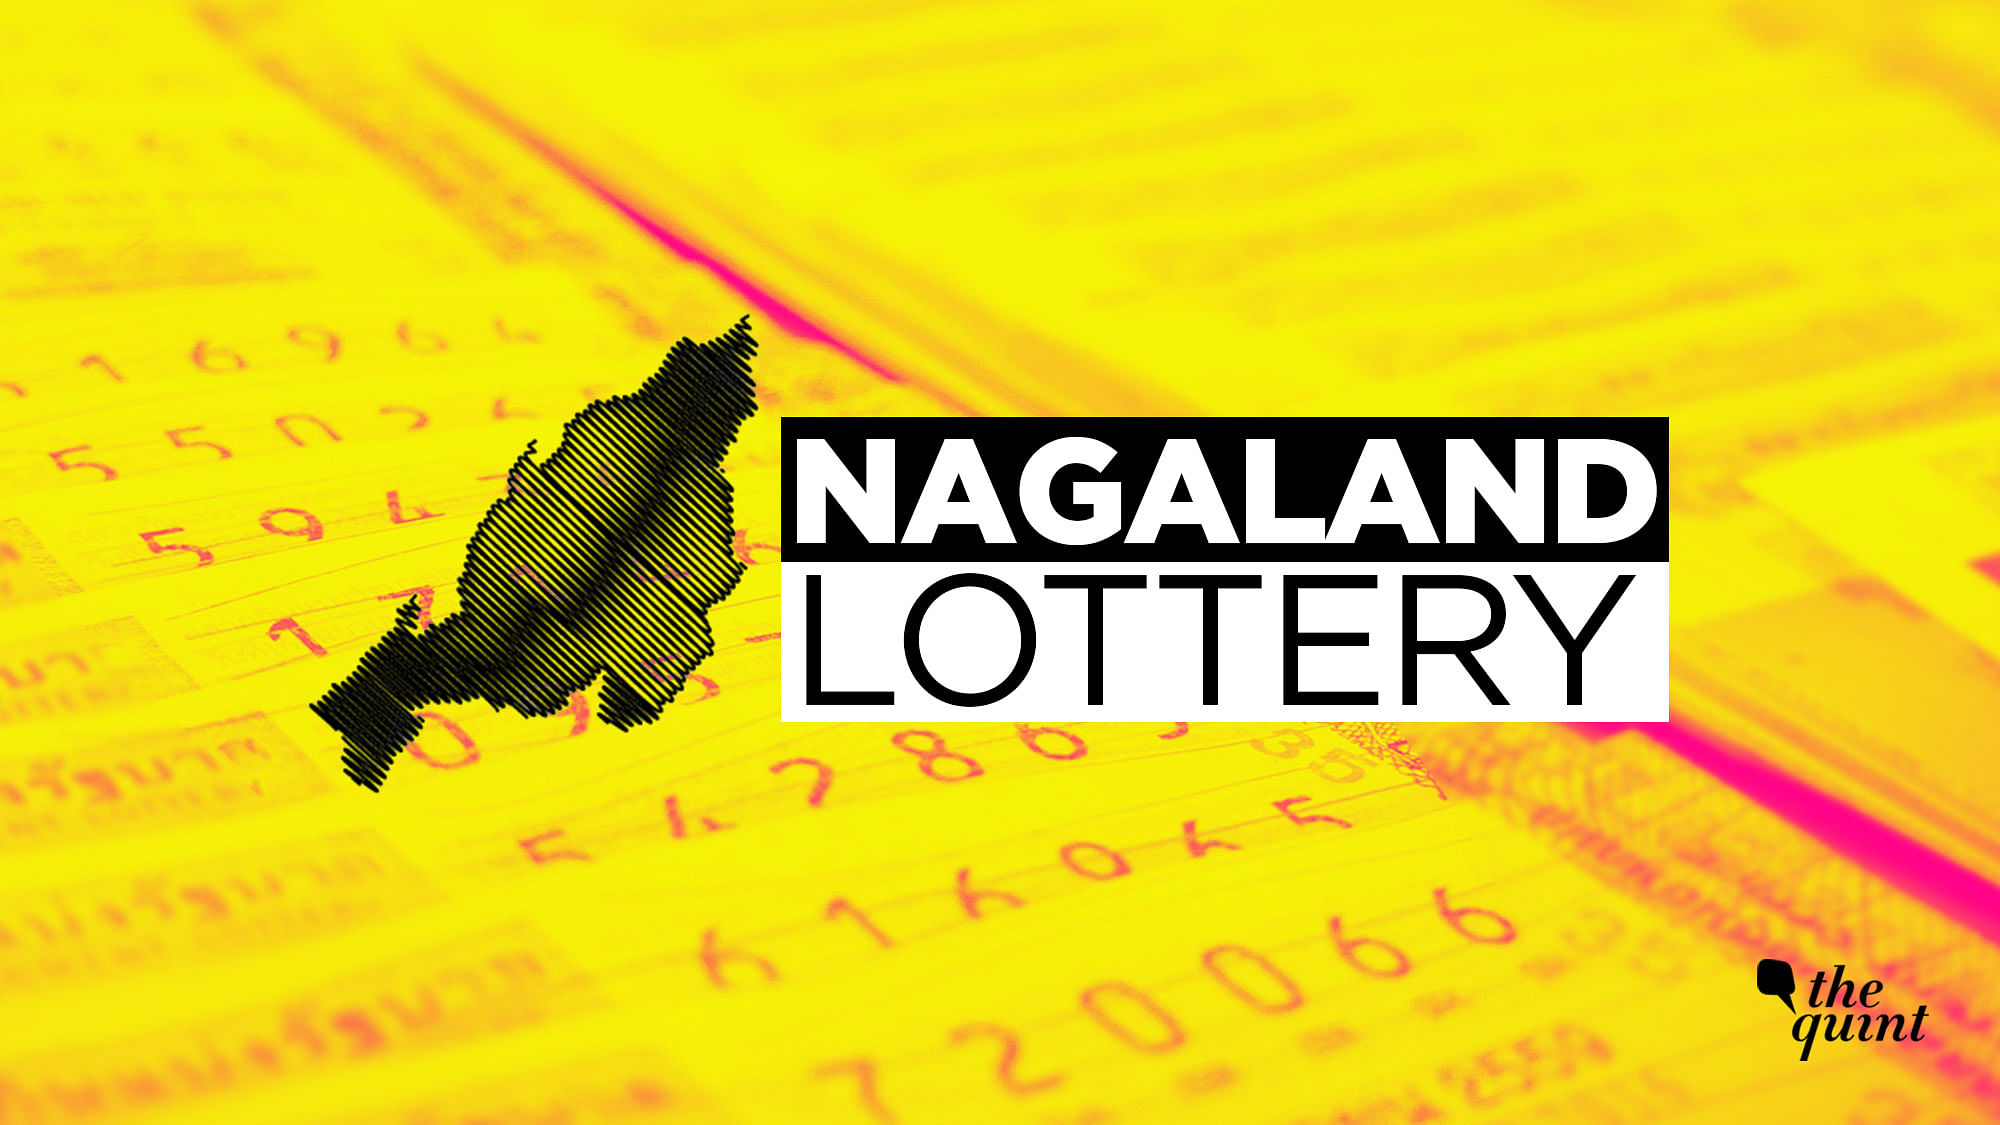 Nagaland State Lottery Results of Dear Faithful Morning lottery today at 11:55 am